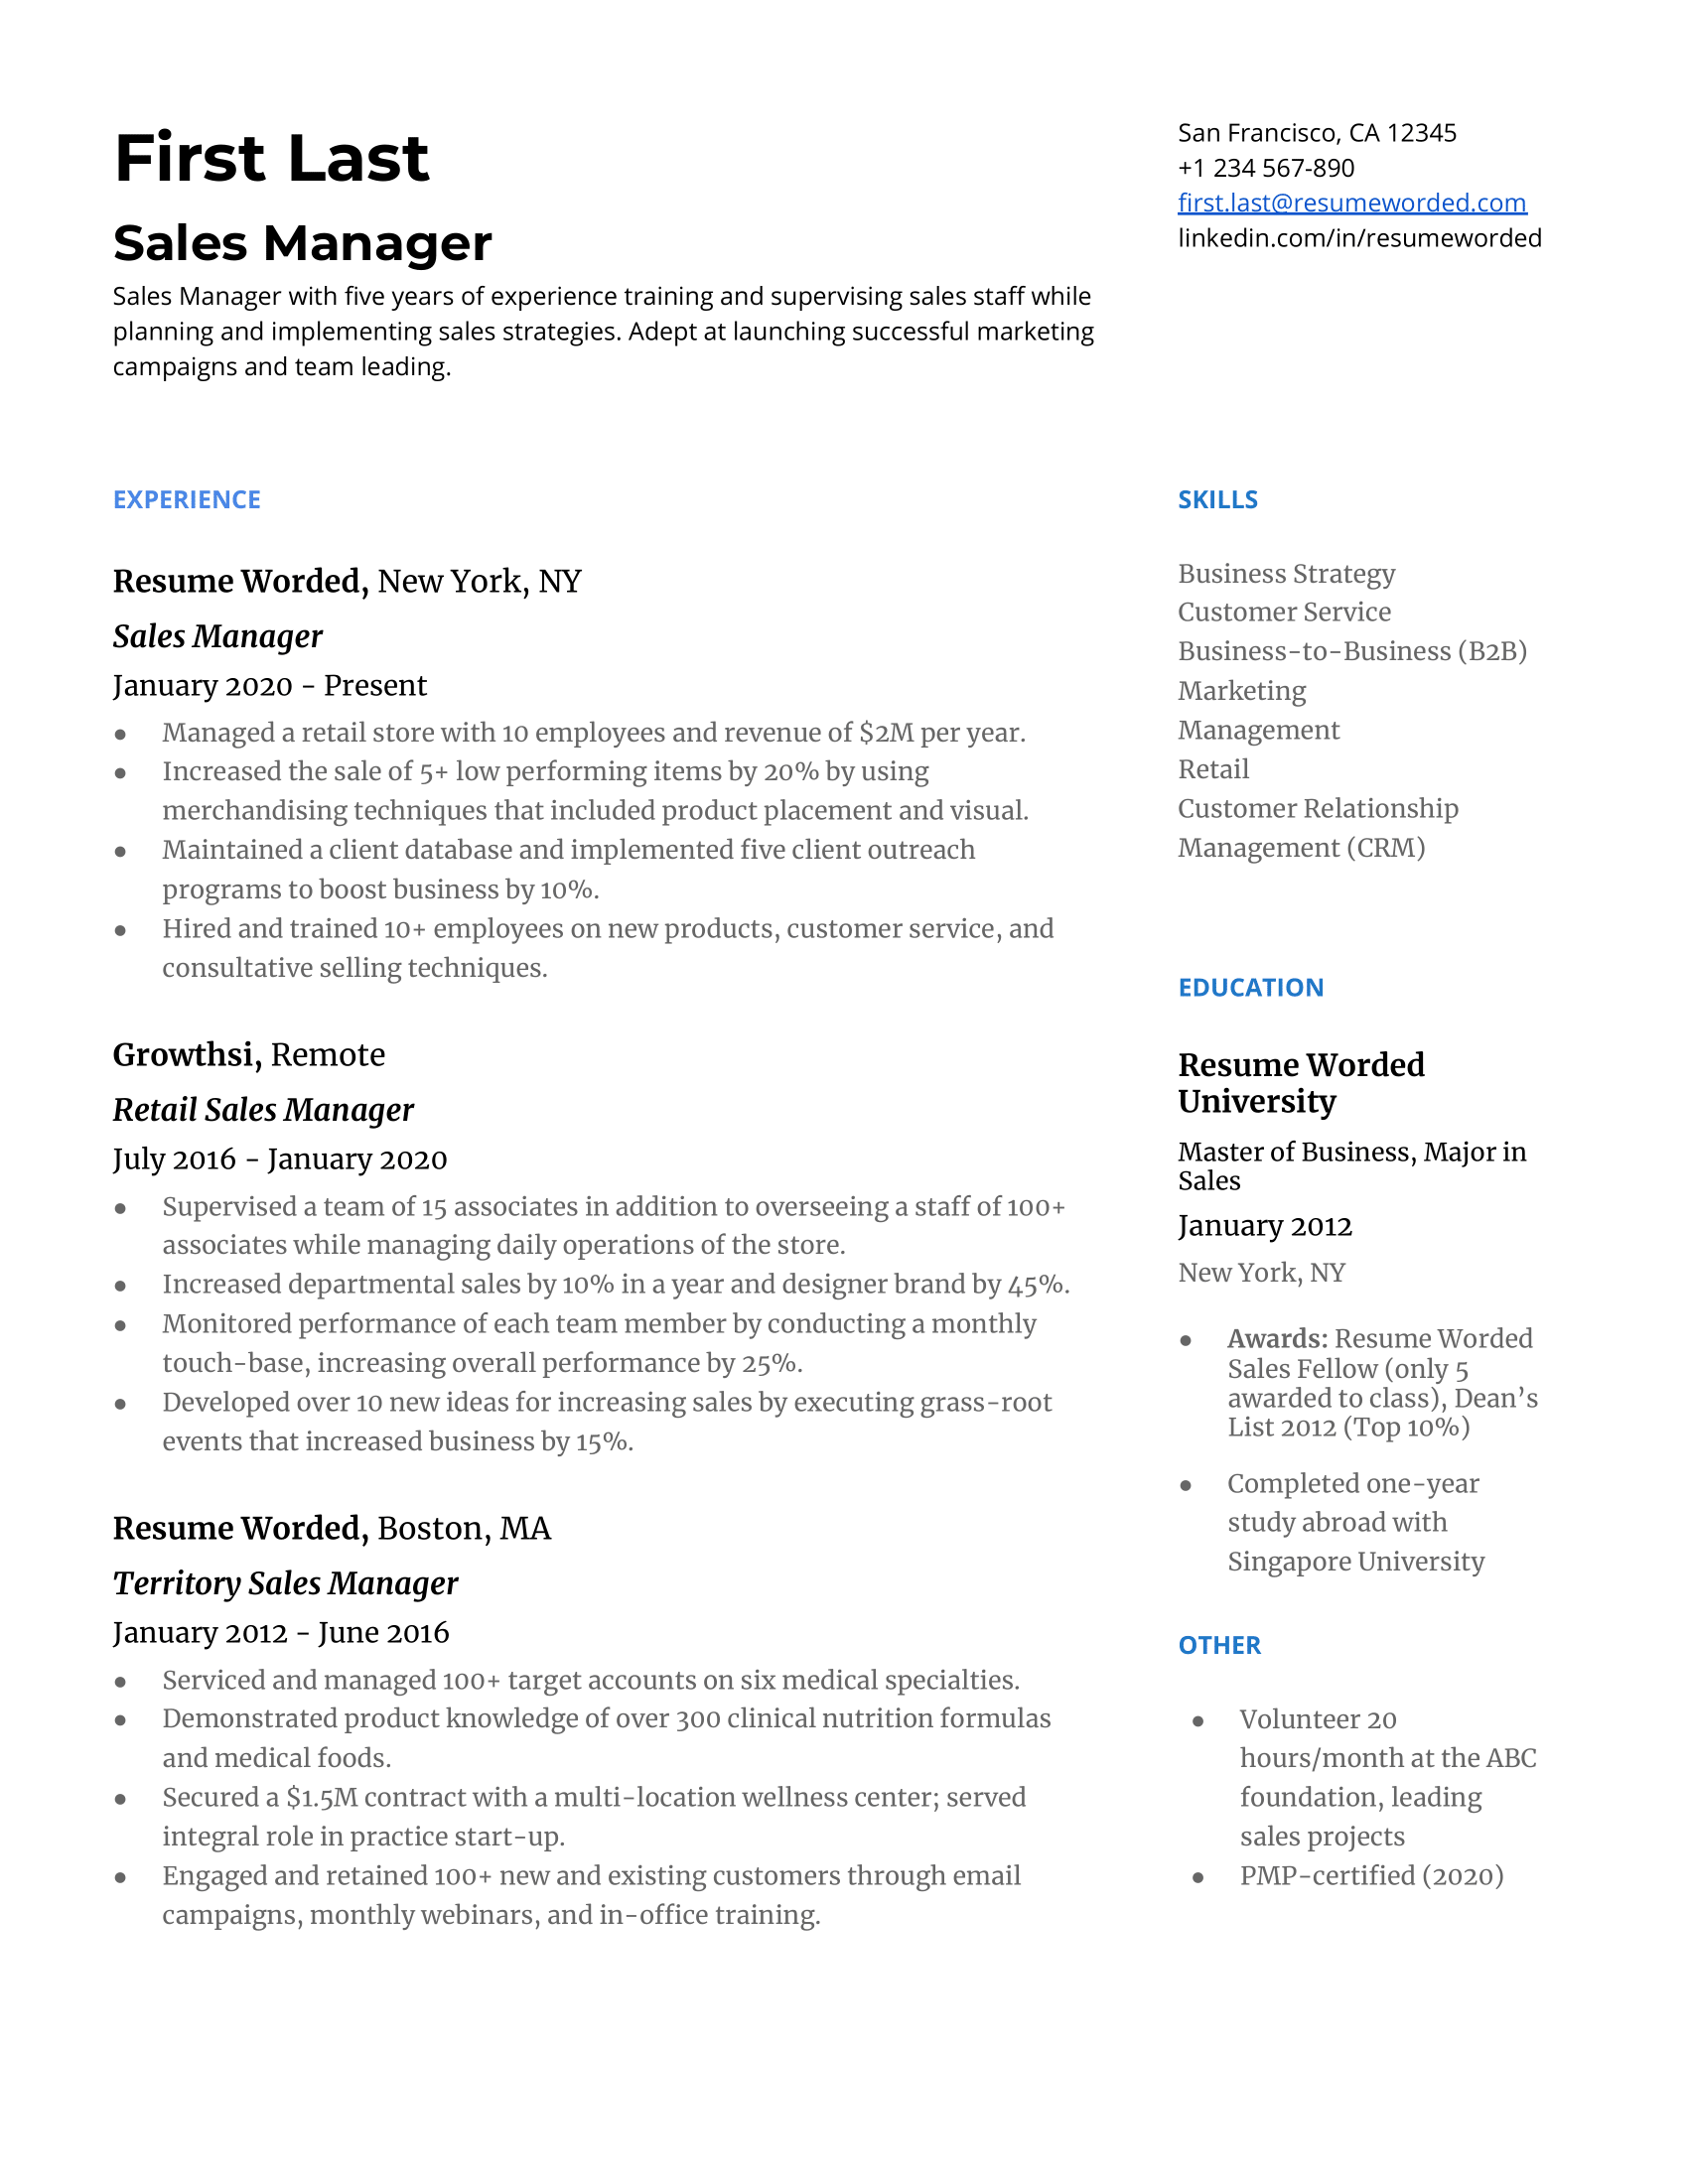 A well-crafted CV for a highly competent Sales Manager.